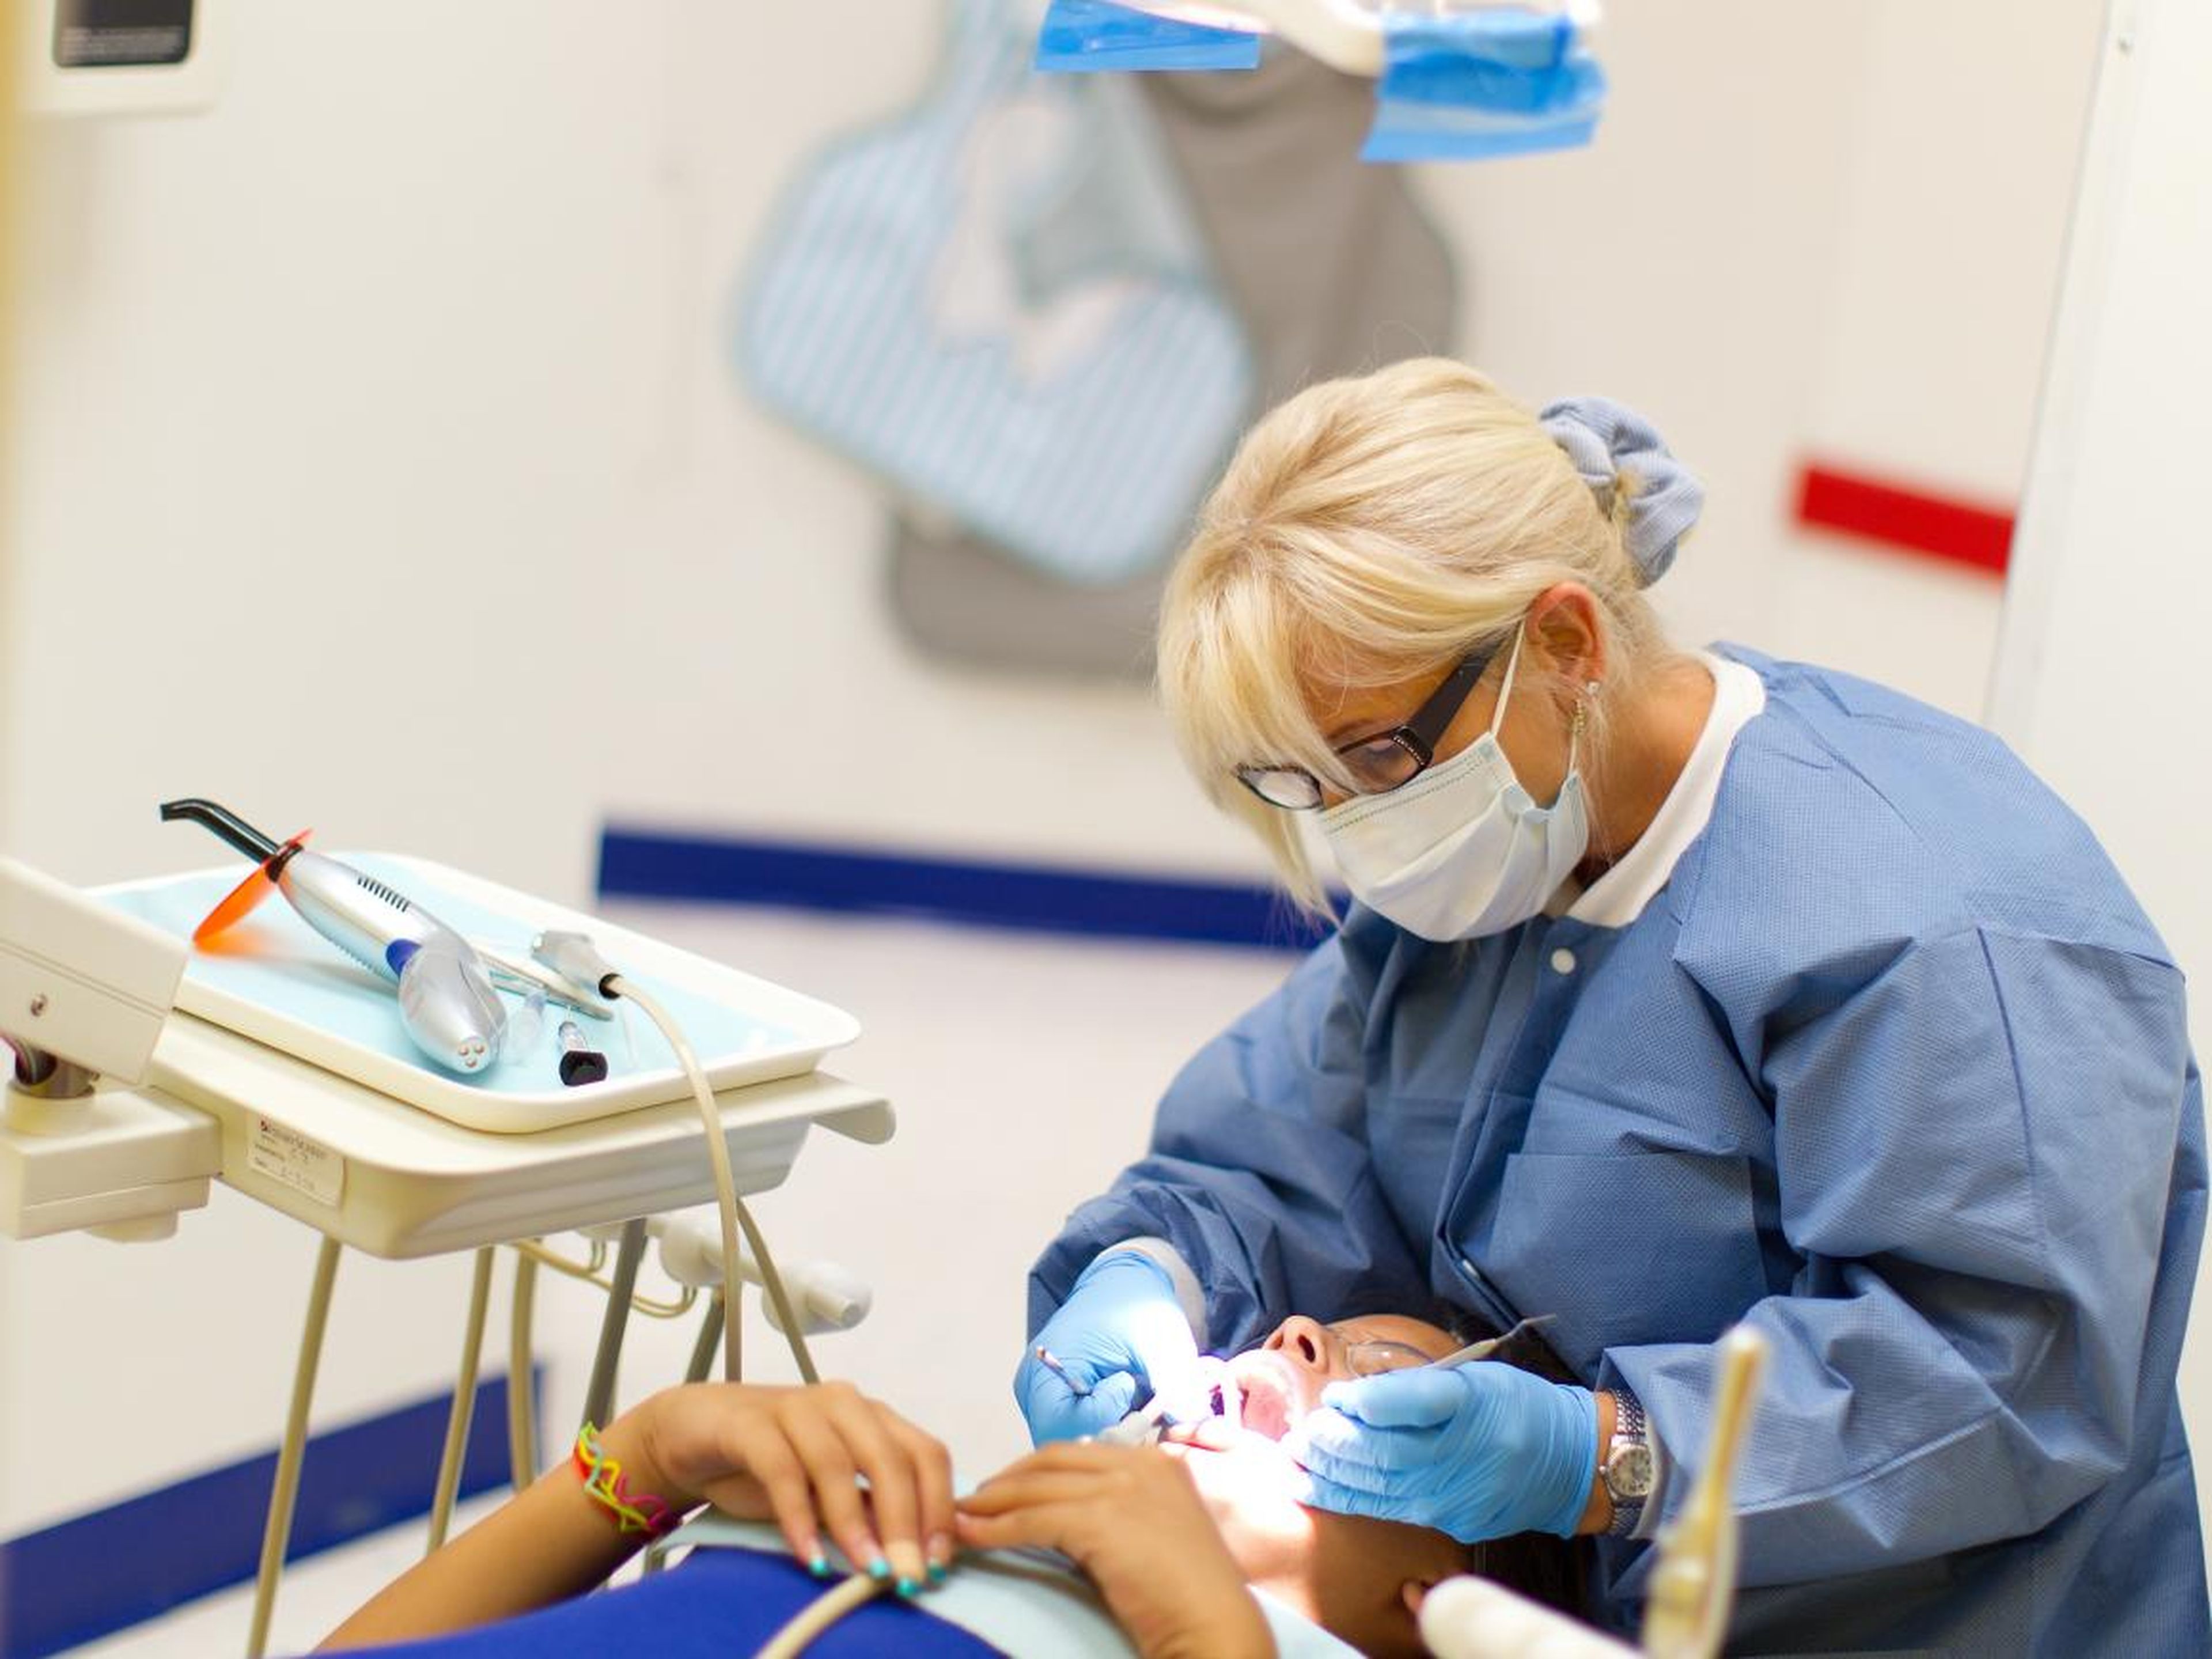 2. Dental hygienists work an average of 32.0 hours per week and have average annual earnings of $52,645.